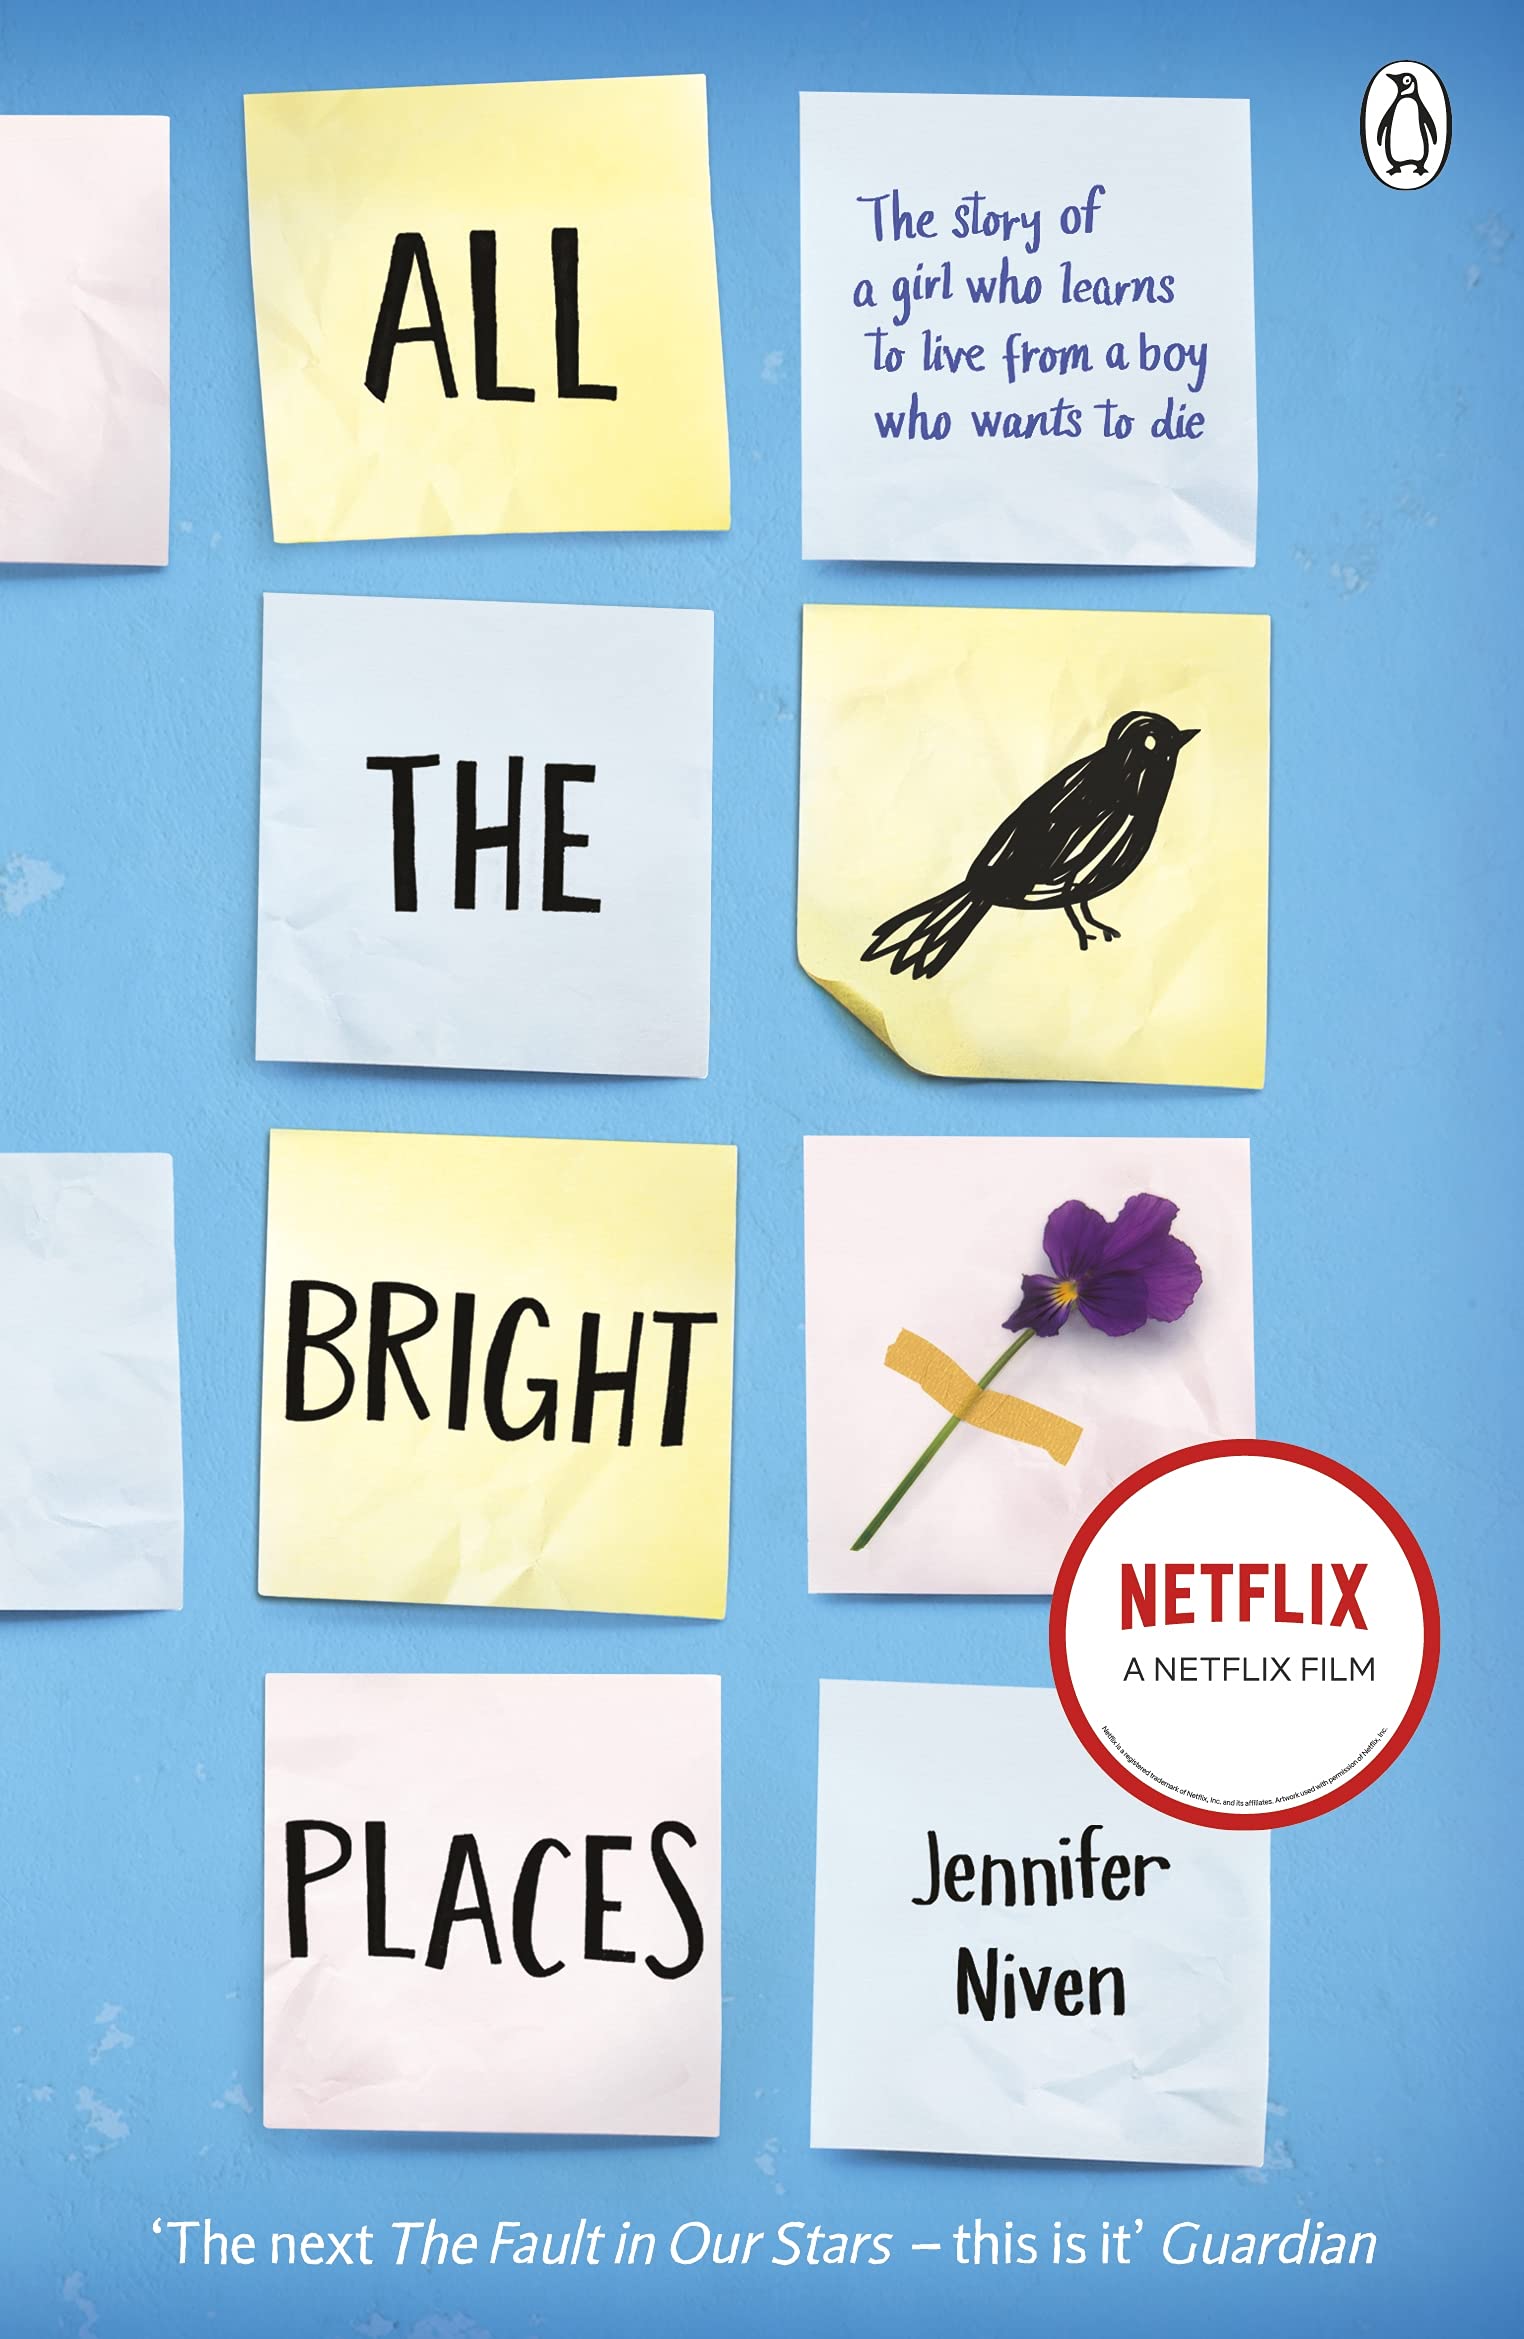 Buy Penguin Random House All The Bright Places: Movie Tie-in Edition Book  Online at Low Prices in India | Penguin Random House All The Bright Places:  Movie Tie-in Edition Reviews & Ratings -